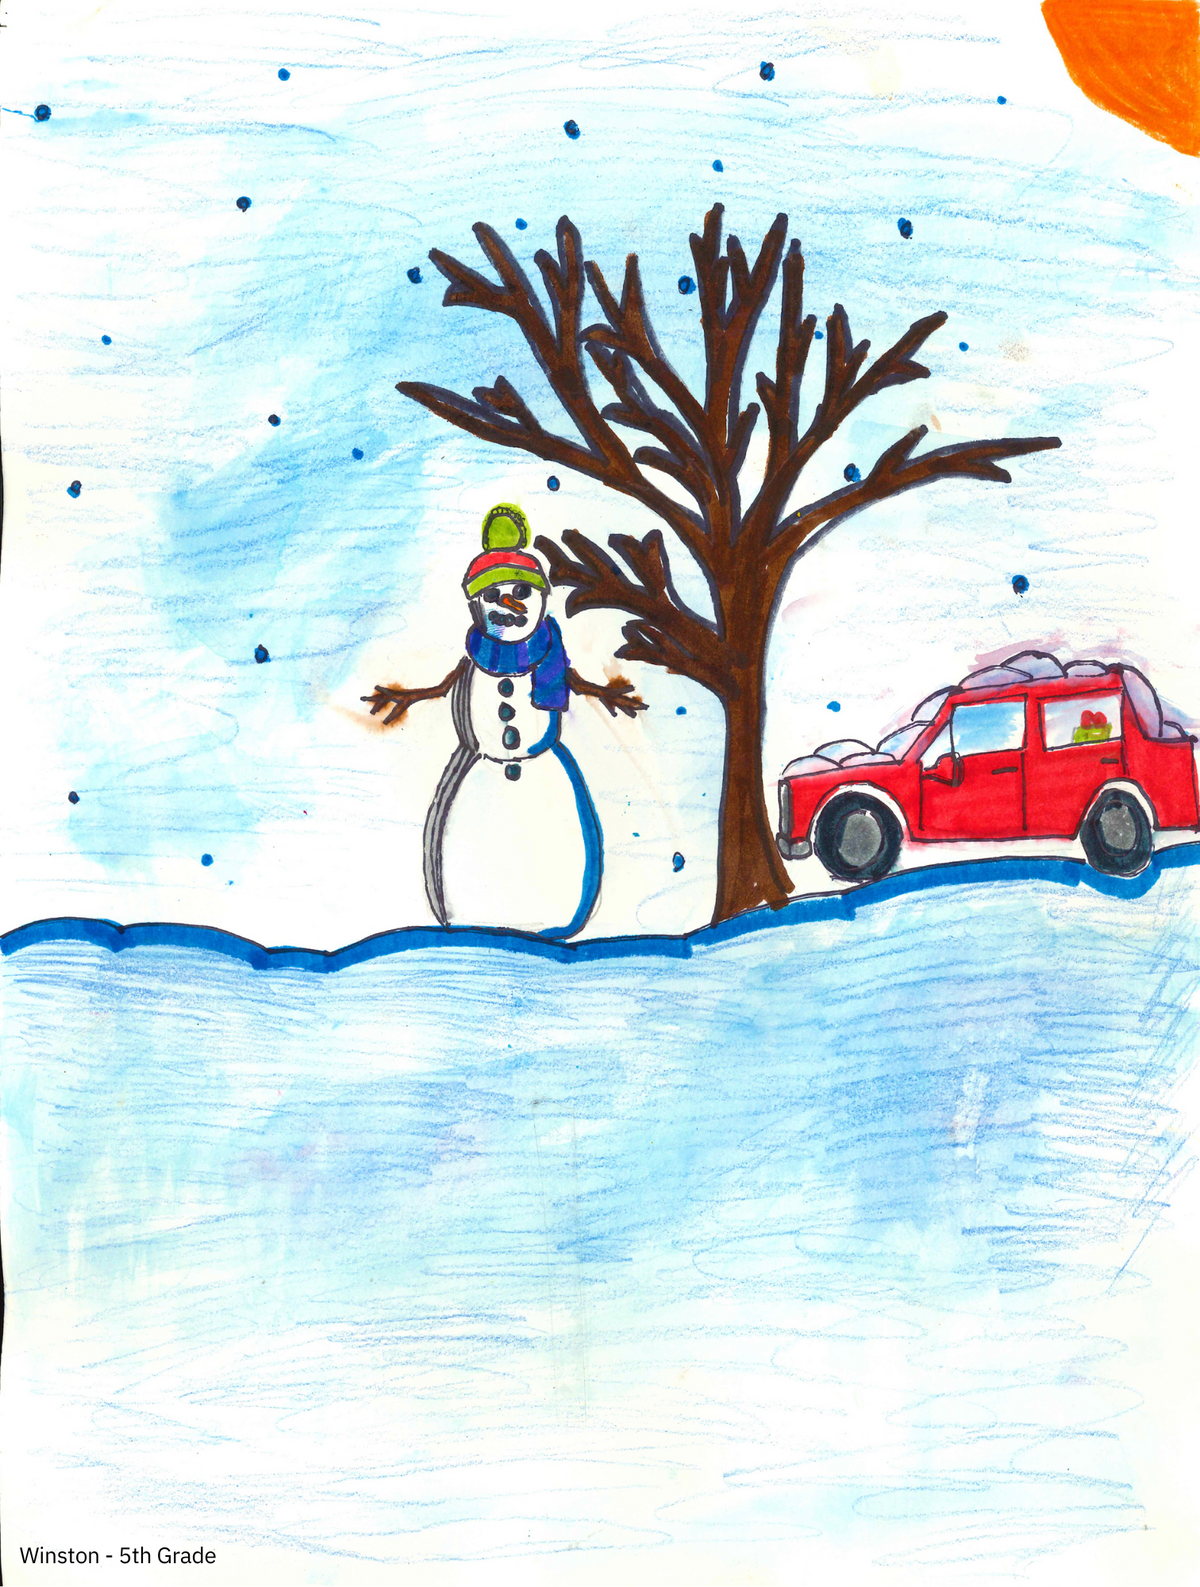 Student's artwork shows snowman outside next to a barren tree and a car covered in snow.